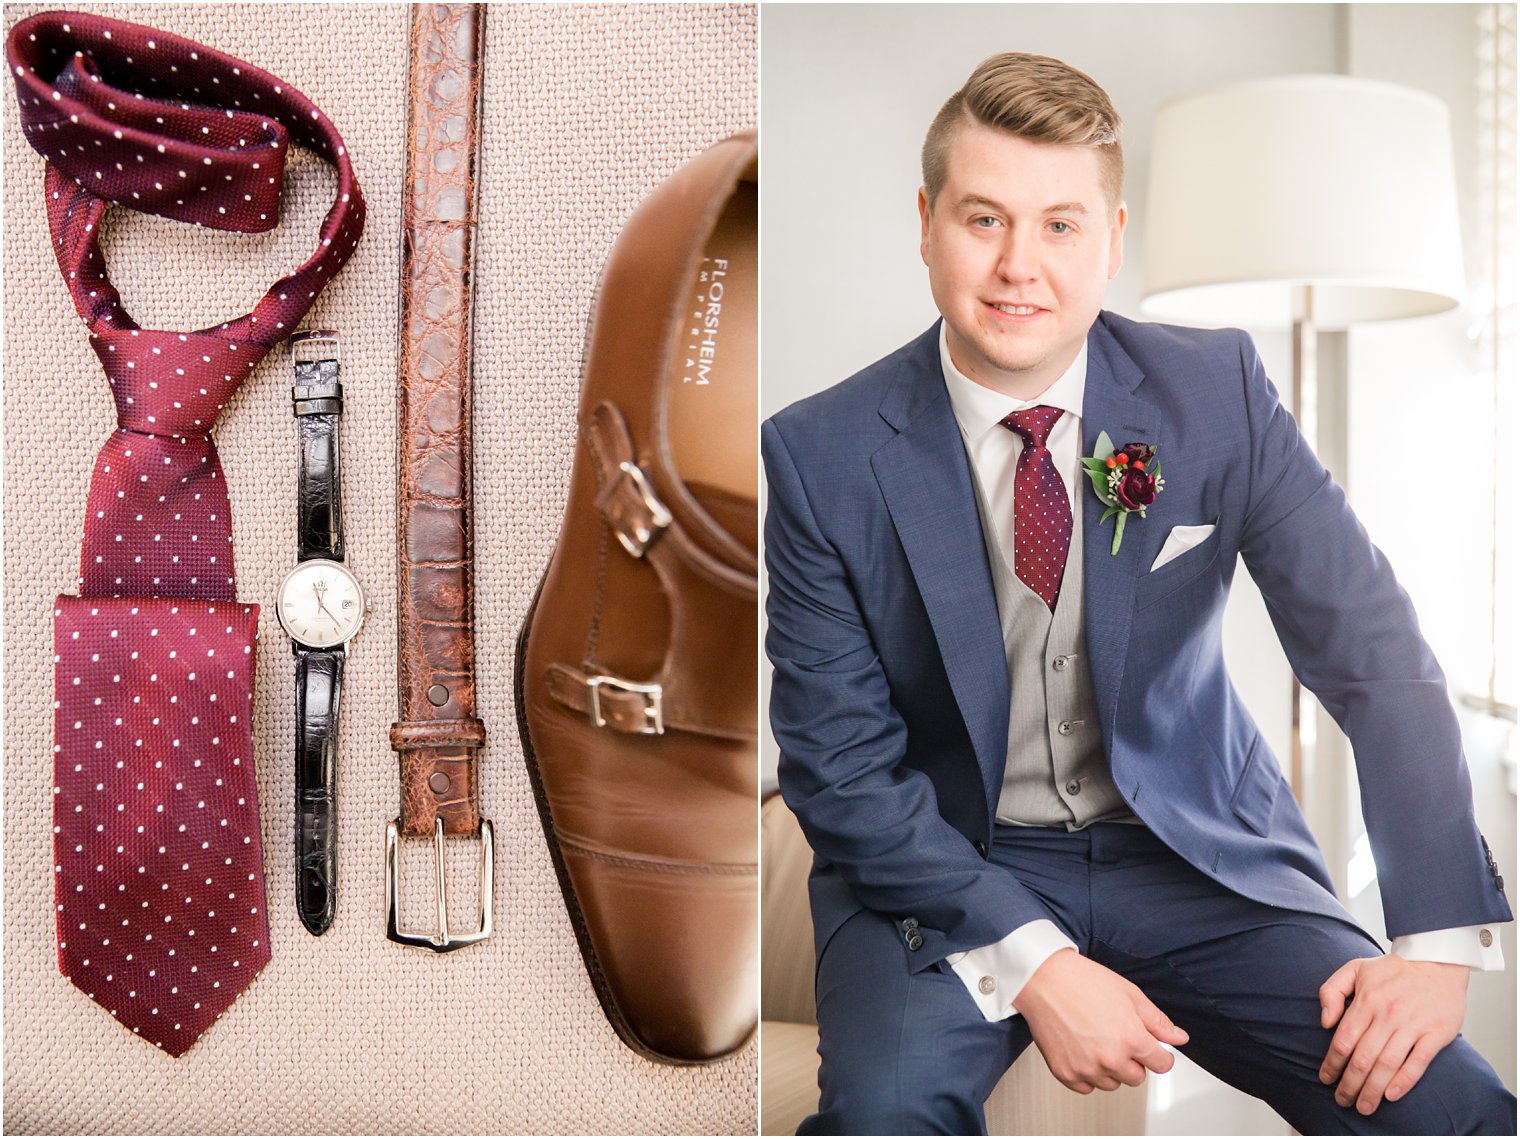 Groom on wedding day wearing burgundy and navy blue